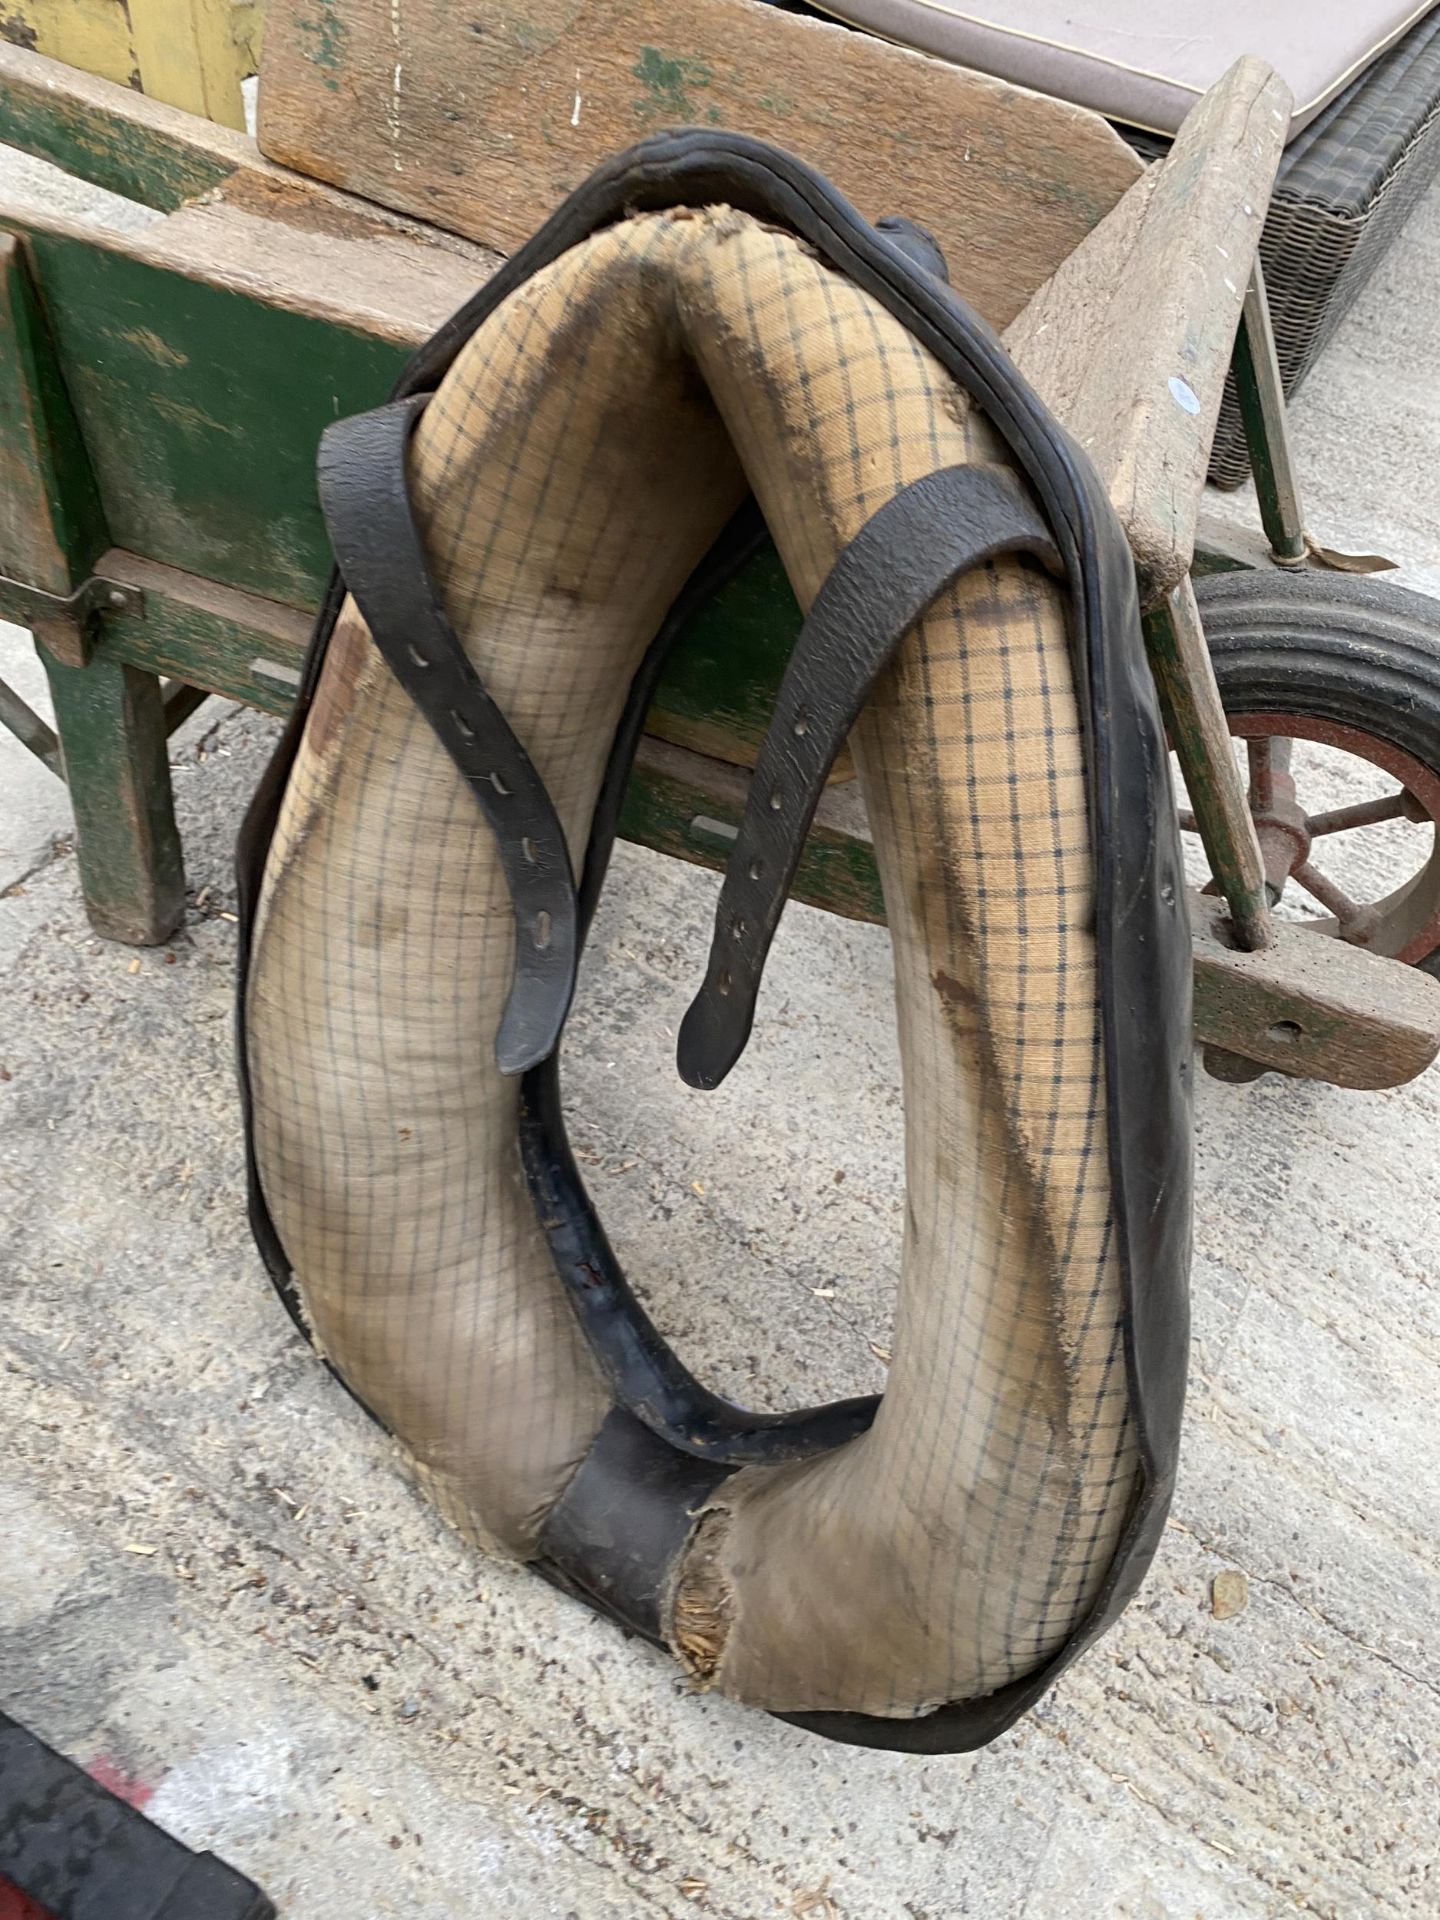 A VINTAGE LEATHER HEAVY HORSE HARNESS COLLAR - Image 3 of 3